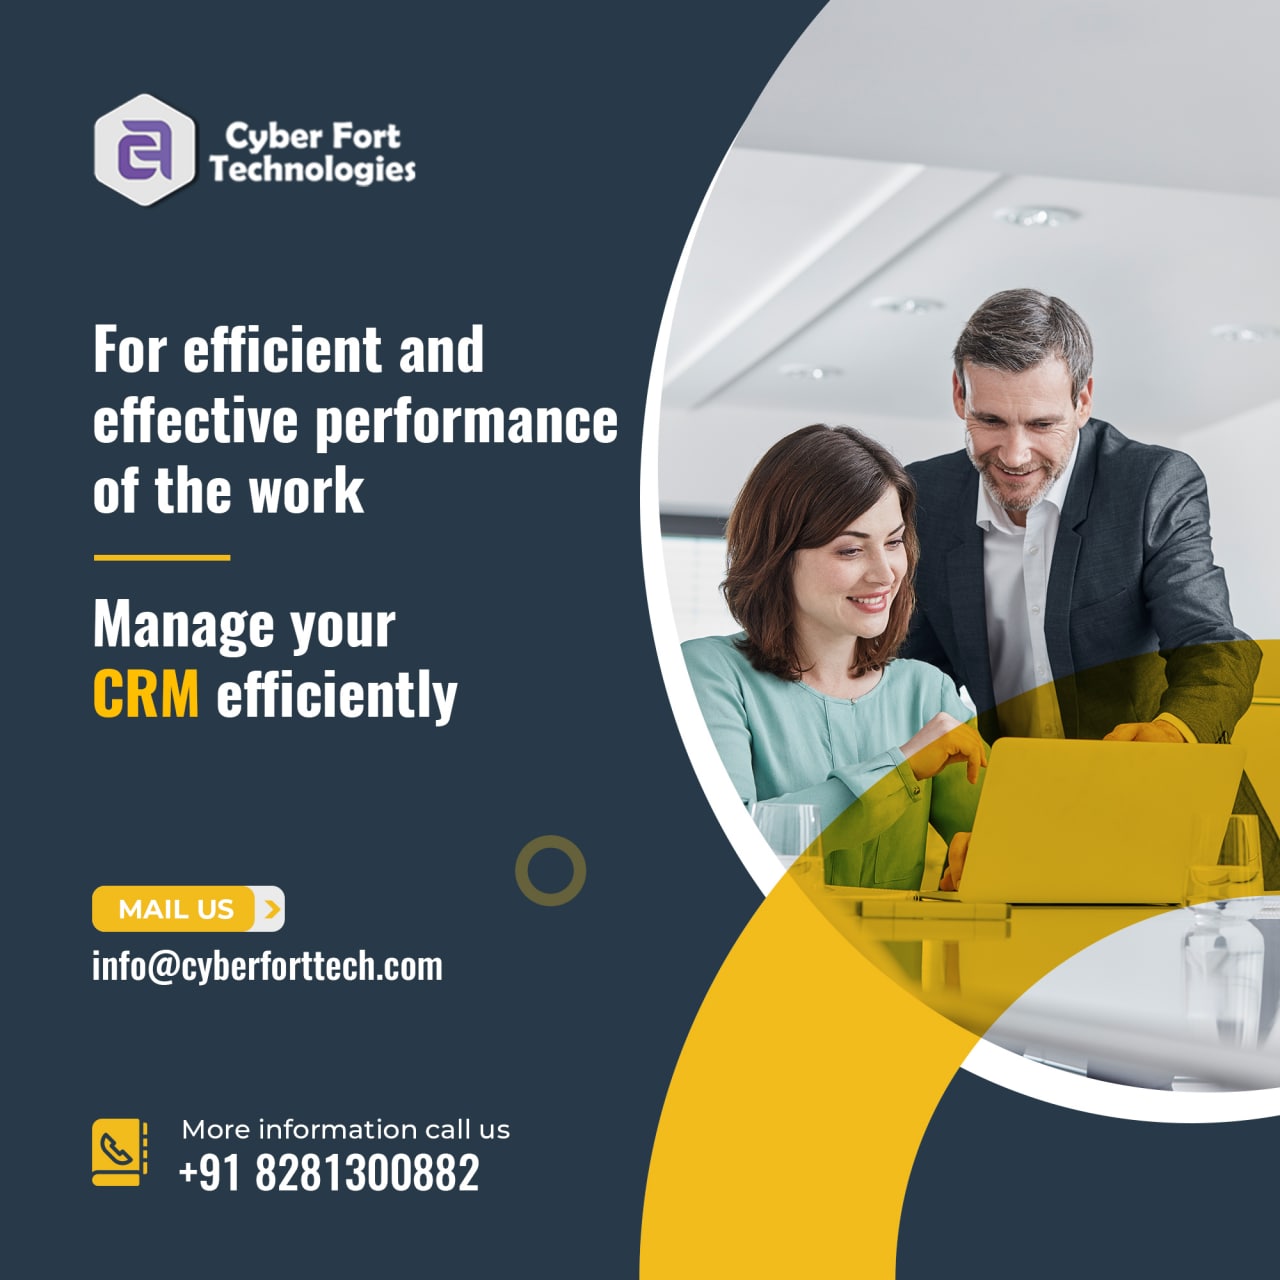  For Efficient and Effective Performance of the Work.